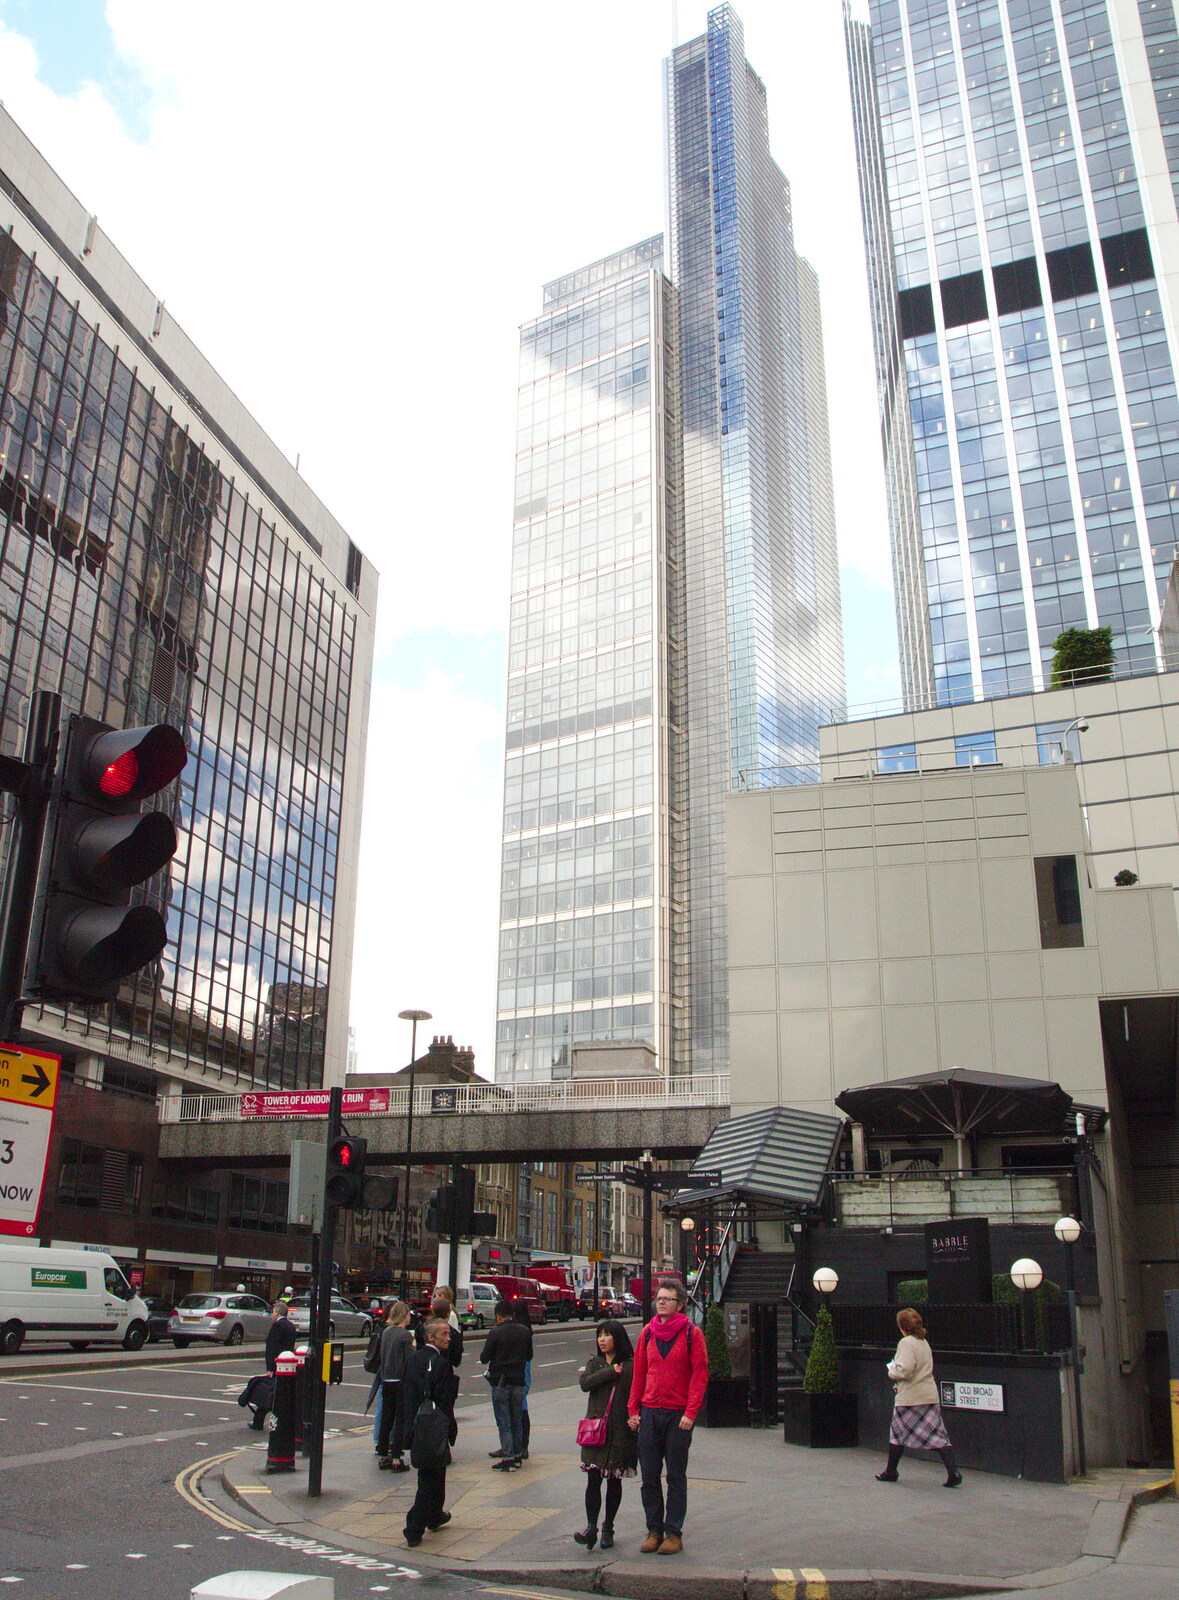 The Heron Building and London Wall from A May Miscellany, London - 8th May 2014